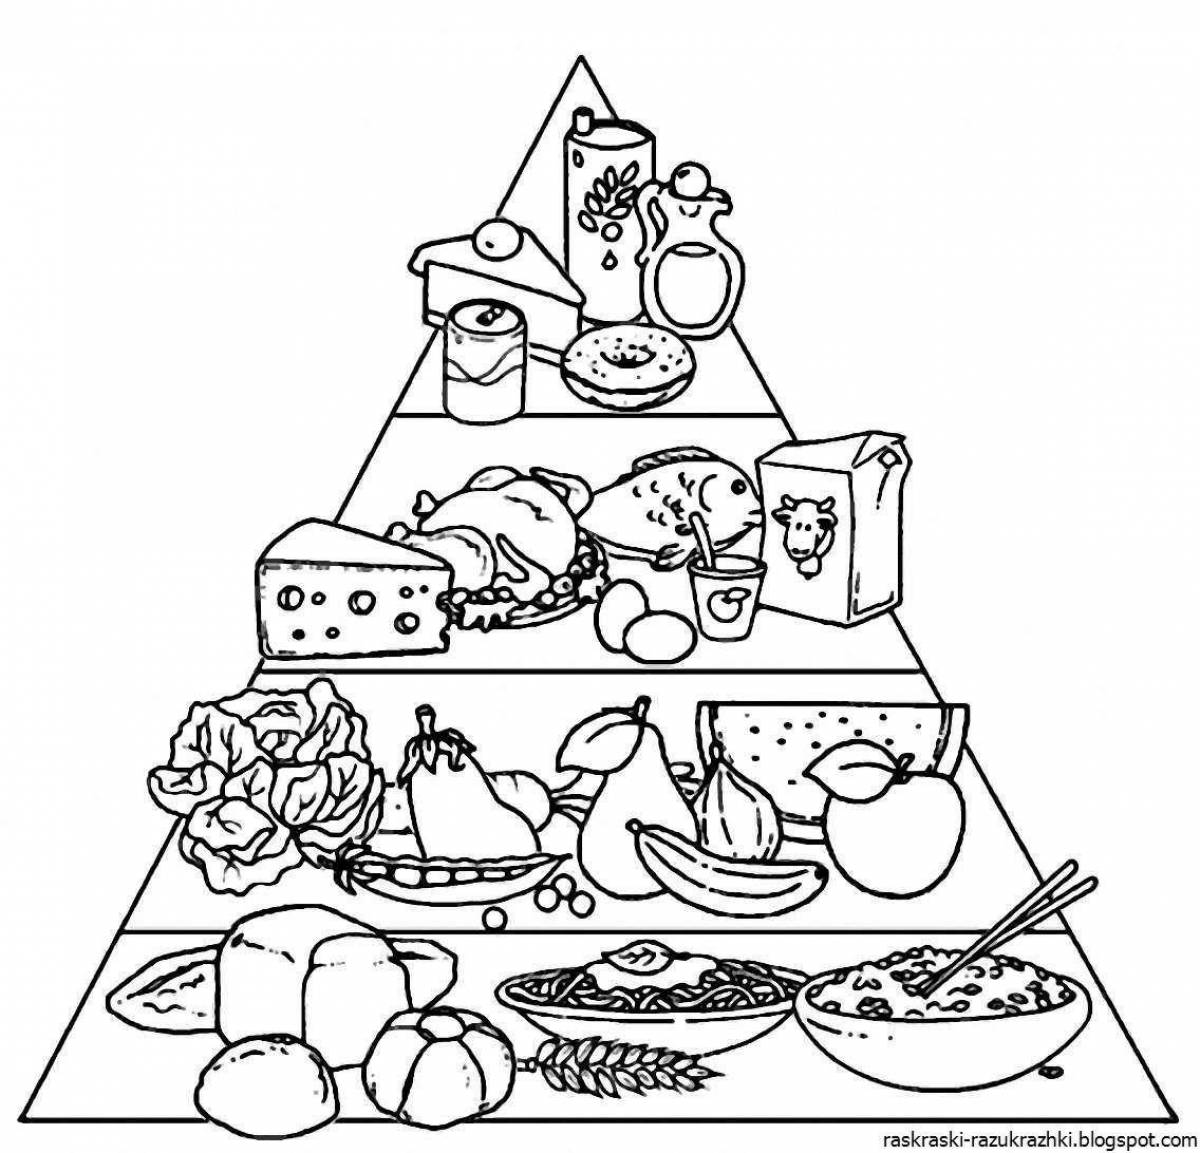 Colorful holiday table coloring for kids